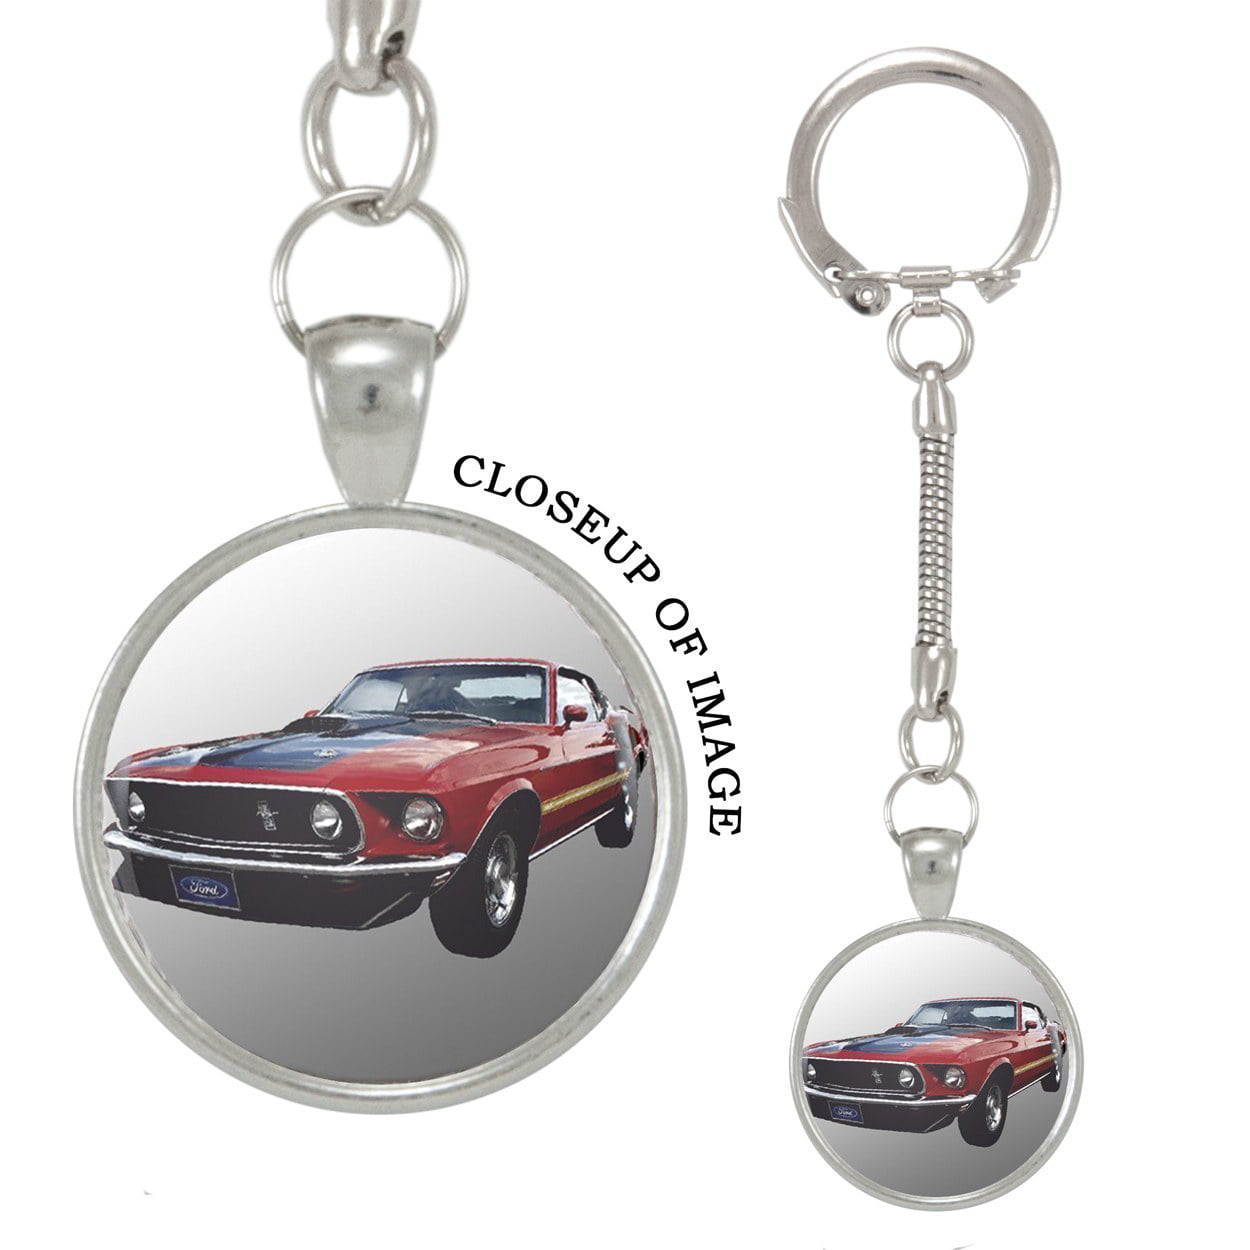 Christmas Gift 008 Car Keychain similar to 1969 Mustang Birthday Gift Personalized Keyring MACH 1 MUSTANG Keychain Father's Day Gift